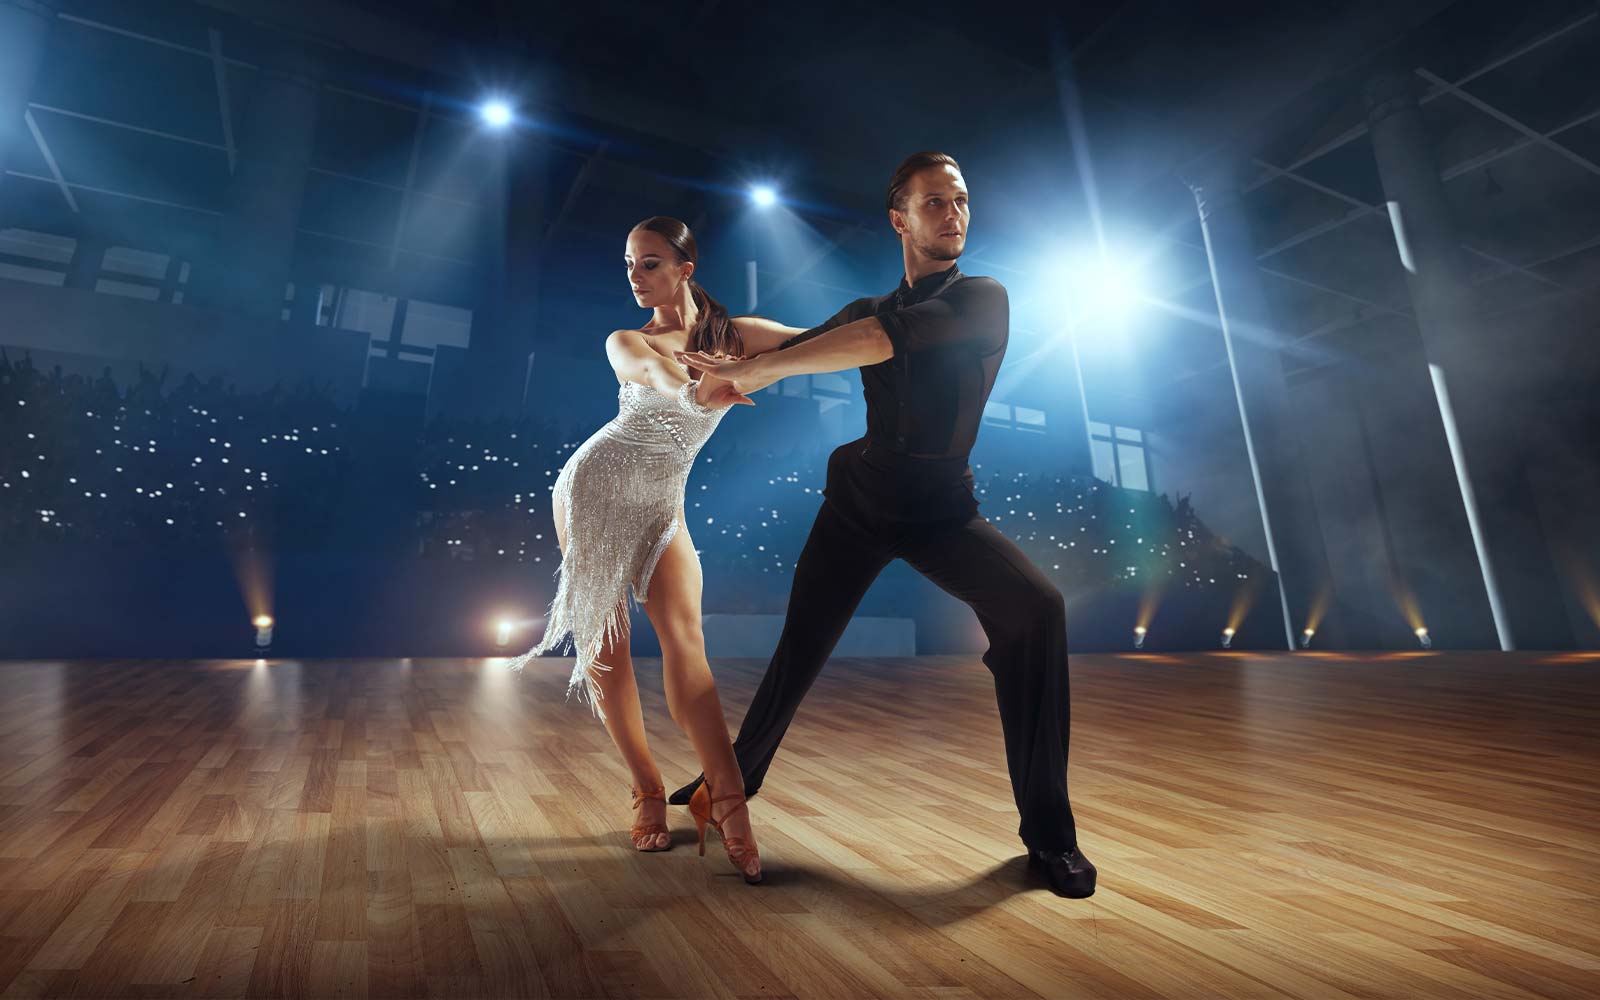 Does dancing ever become effortless?